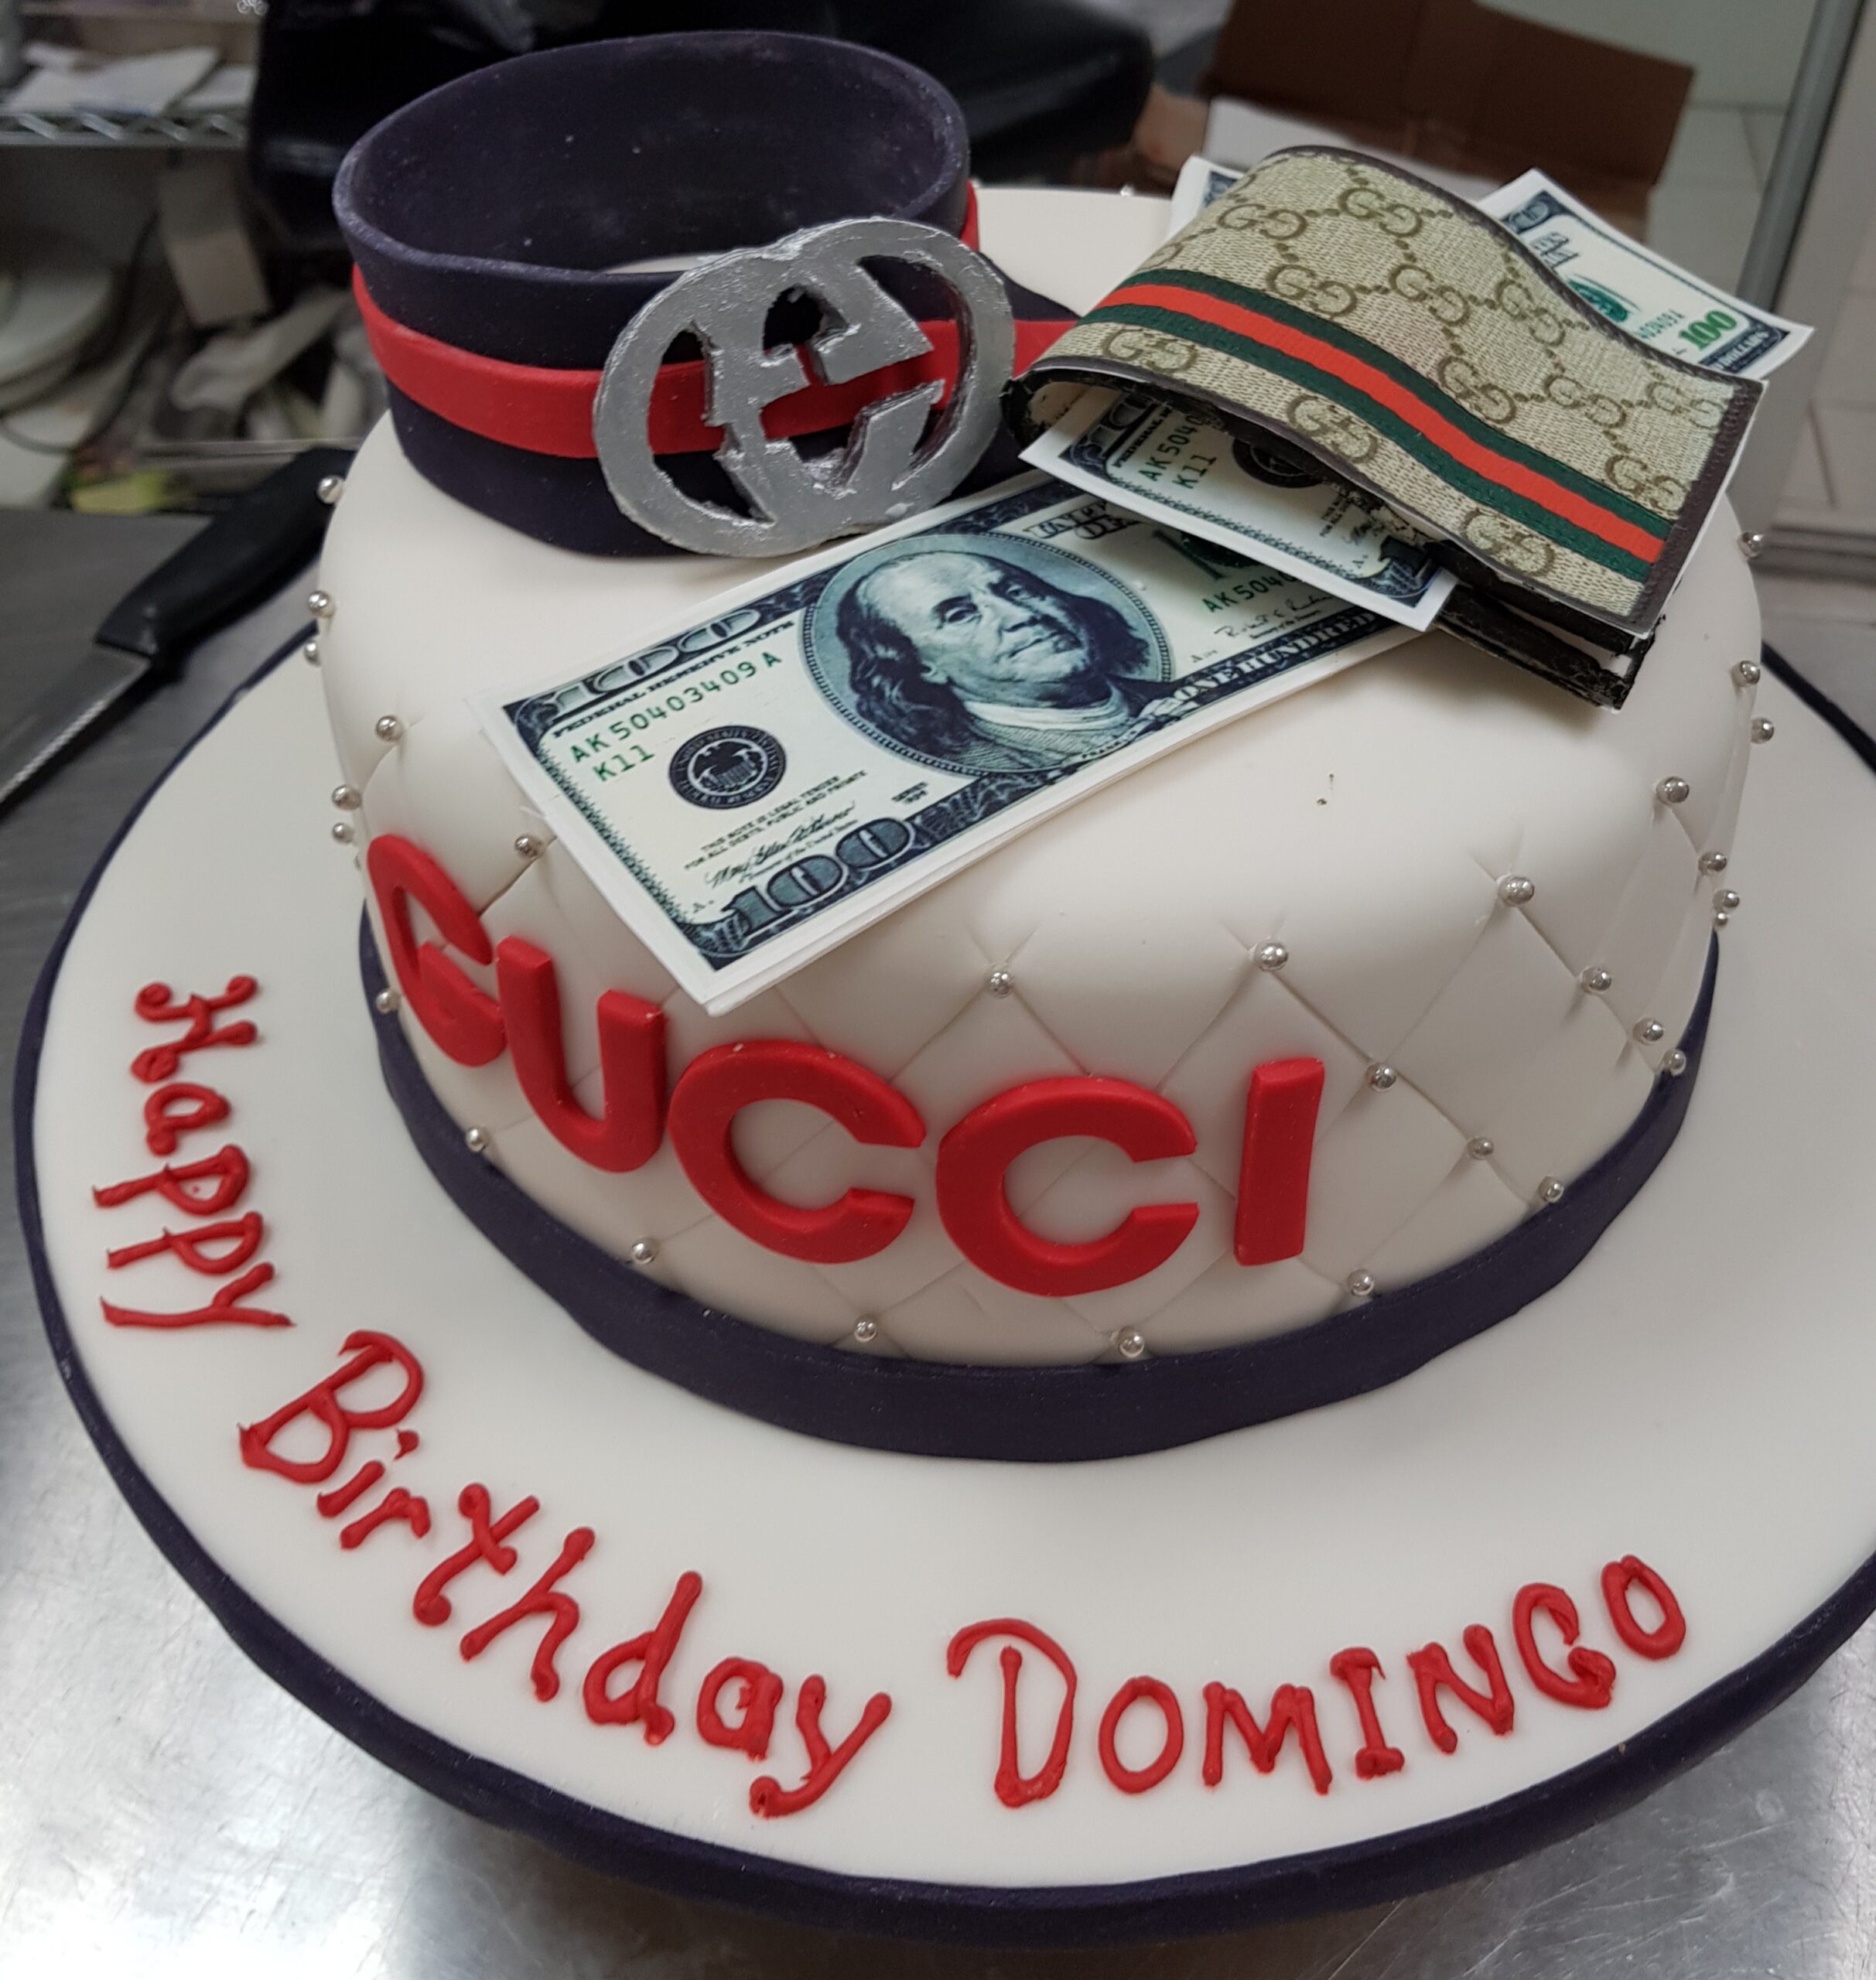 Gucci Cake – Aunt Audreys Cakes